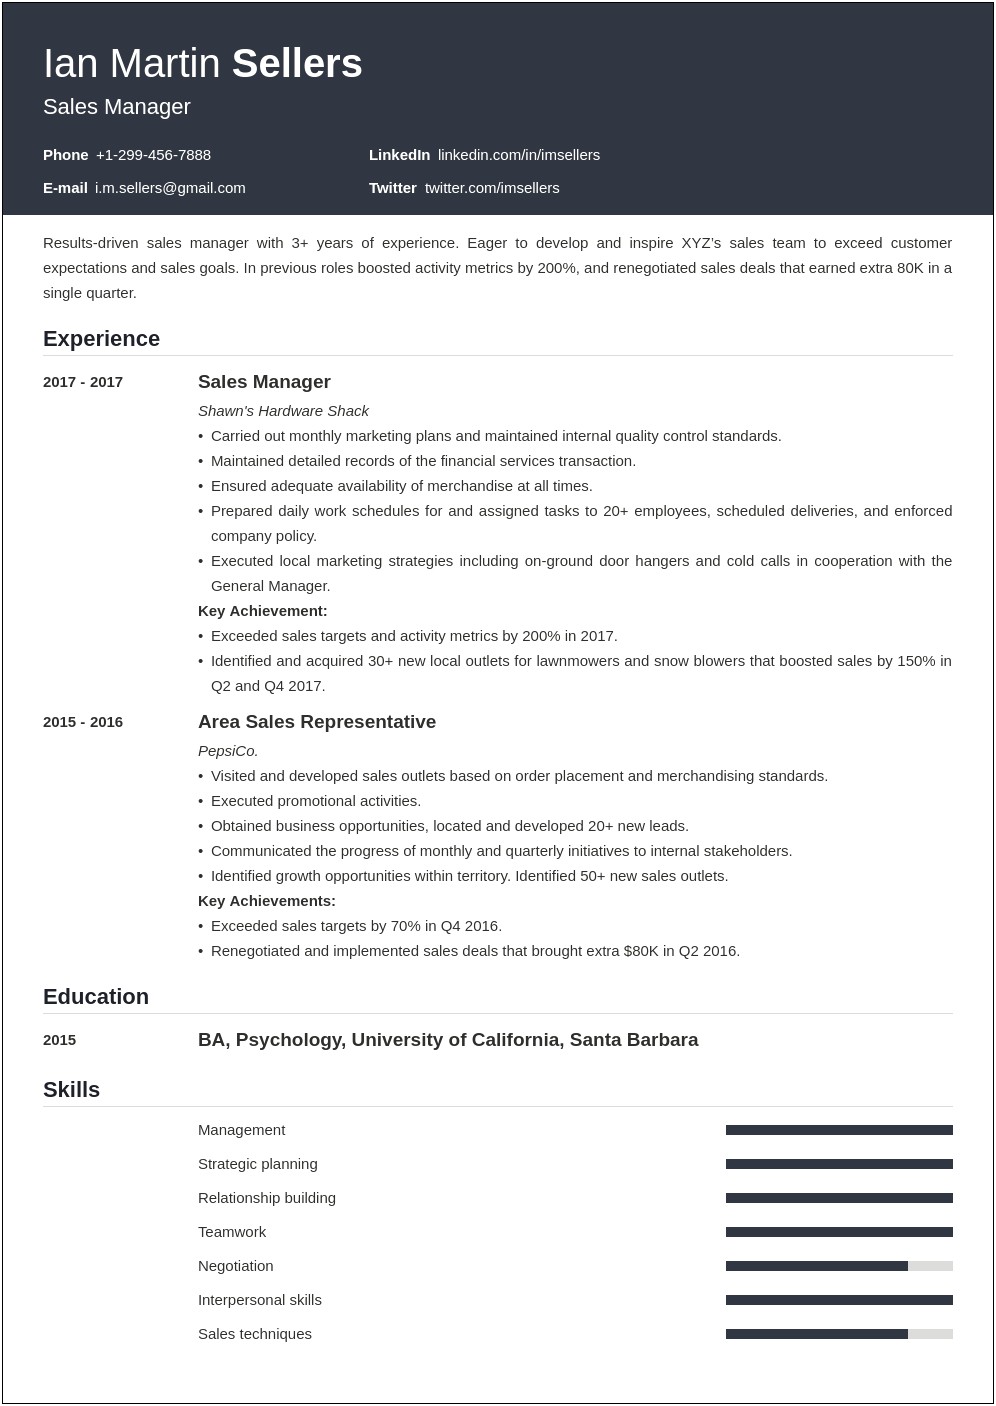 Resume Summary Samples For A Sales Manager